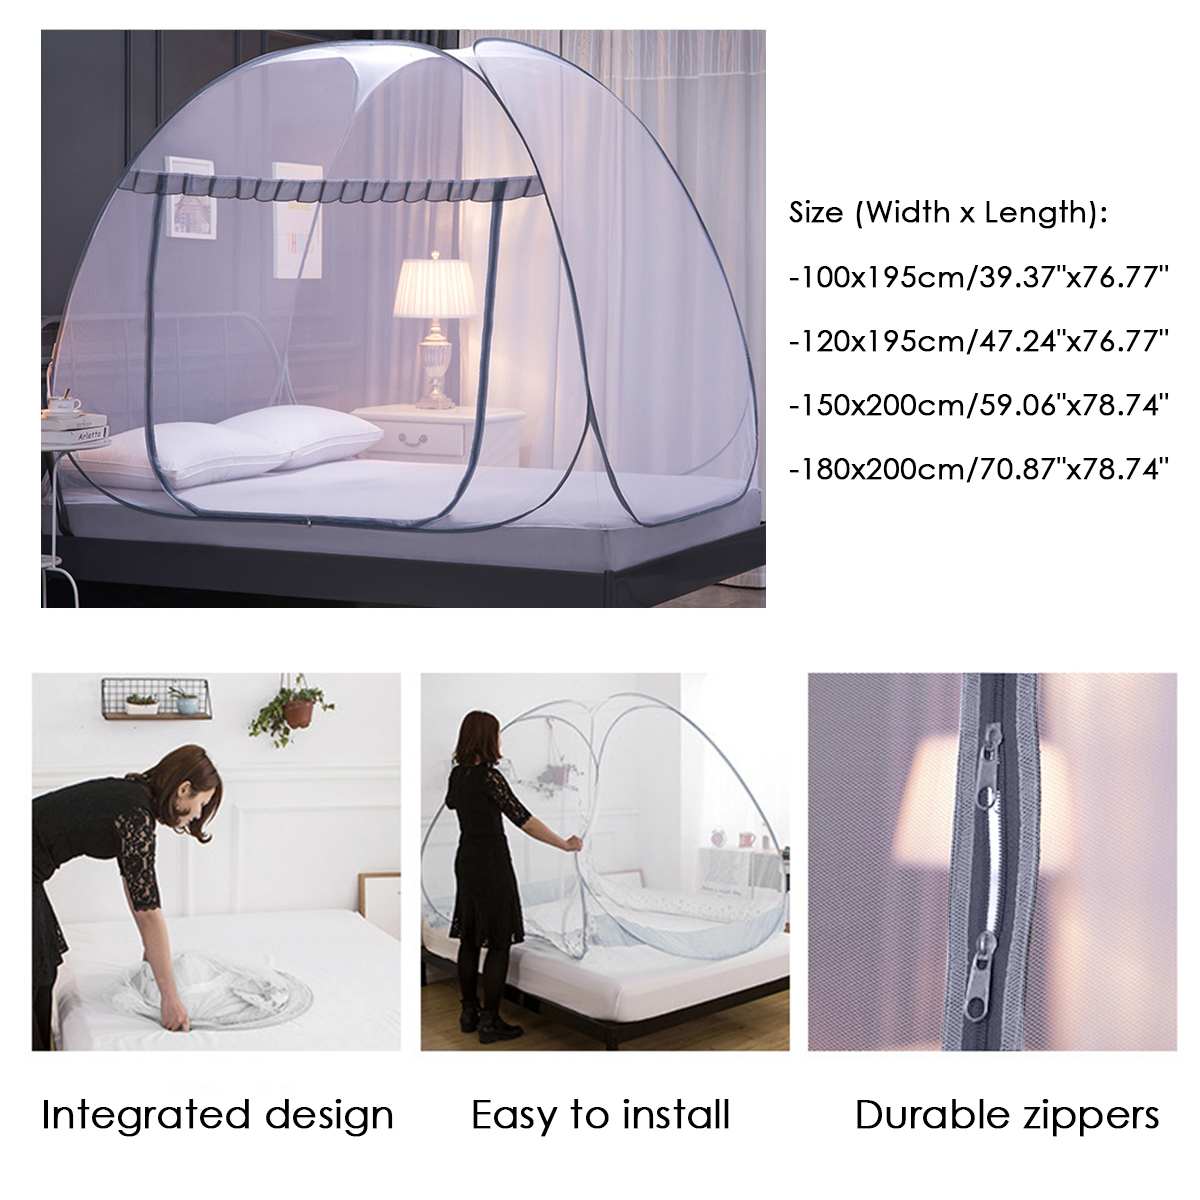 Folding Yurt Mosquito Net Moustiquaire Net Installation-free Mosquitera Canopy Netting For Adult/Kid Bed Tent Home Decor Outdoor